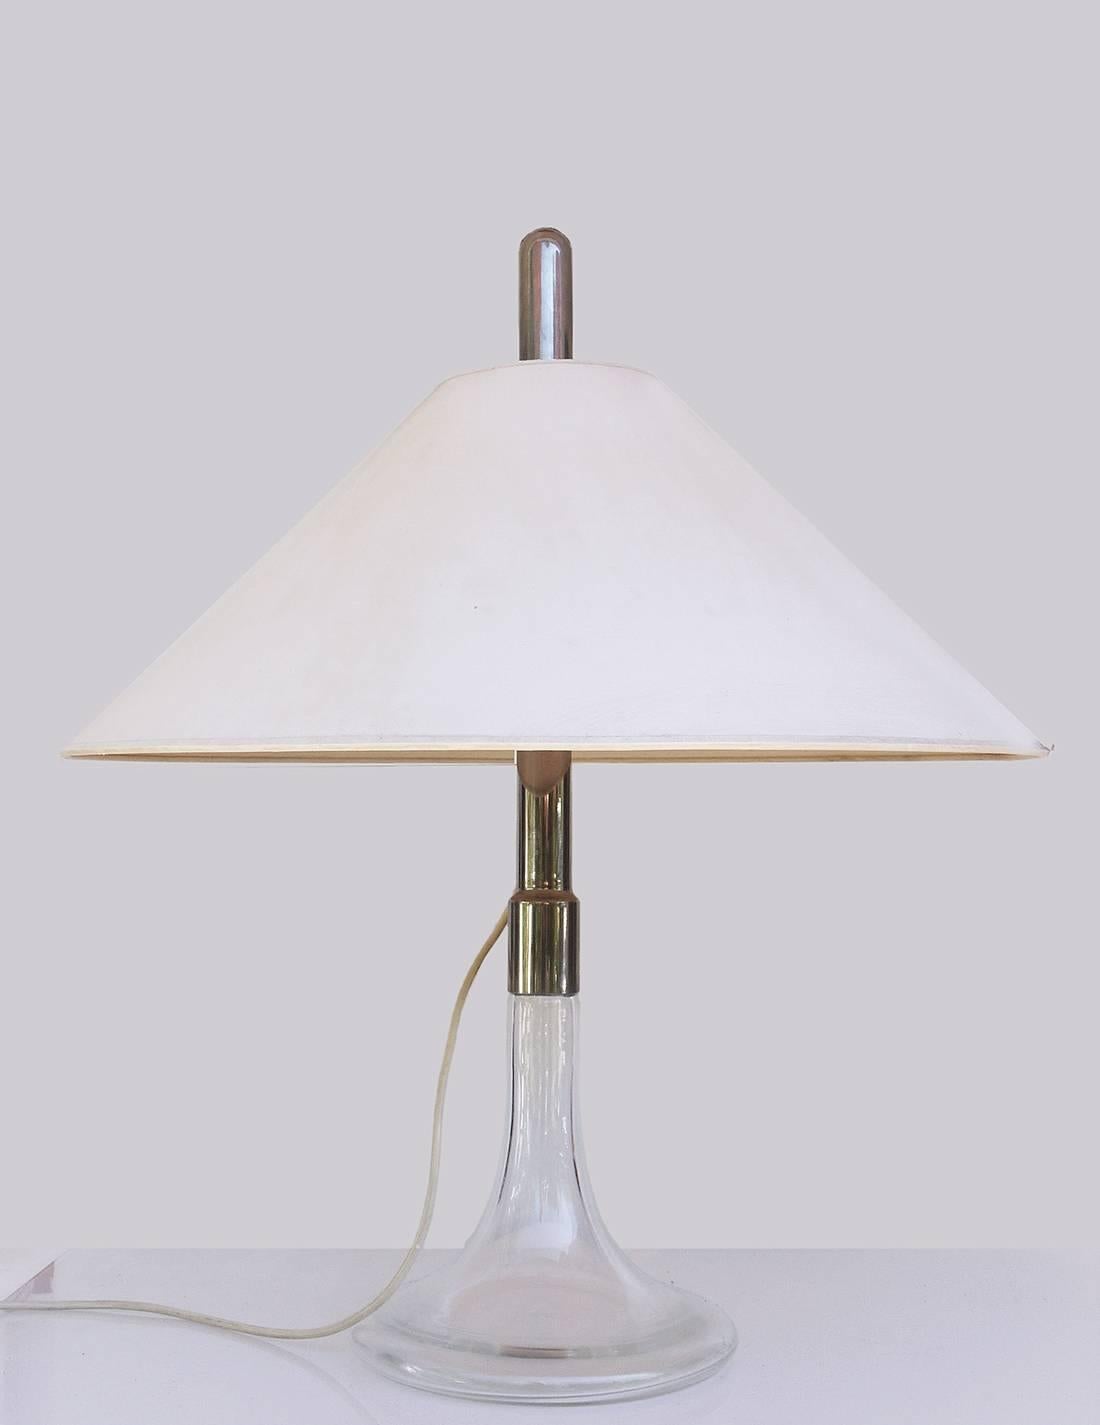 Ingo Maurer table light with a glass foot and the original shade, made in Germany in the 1960s.
 
Measures: width 23.6